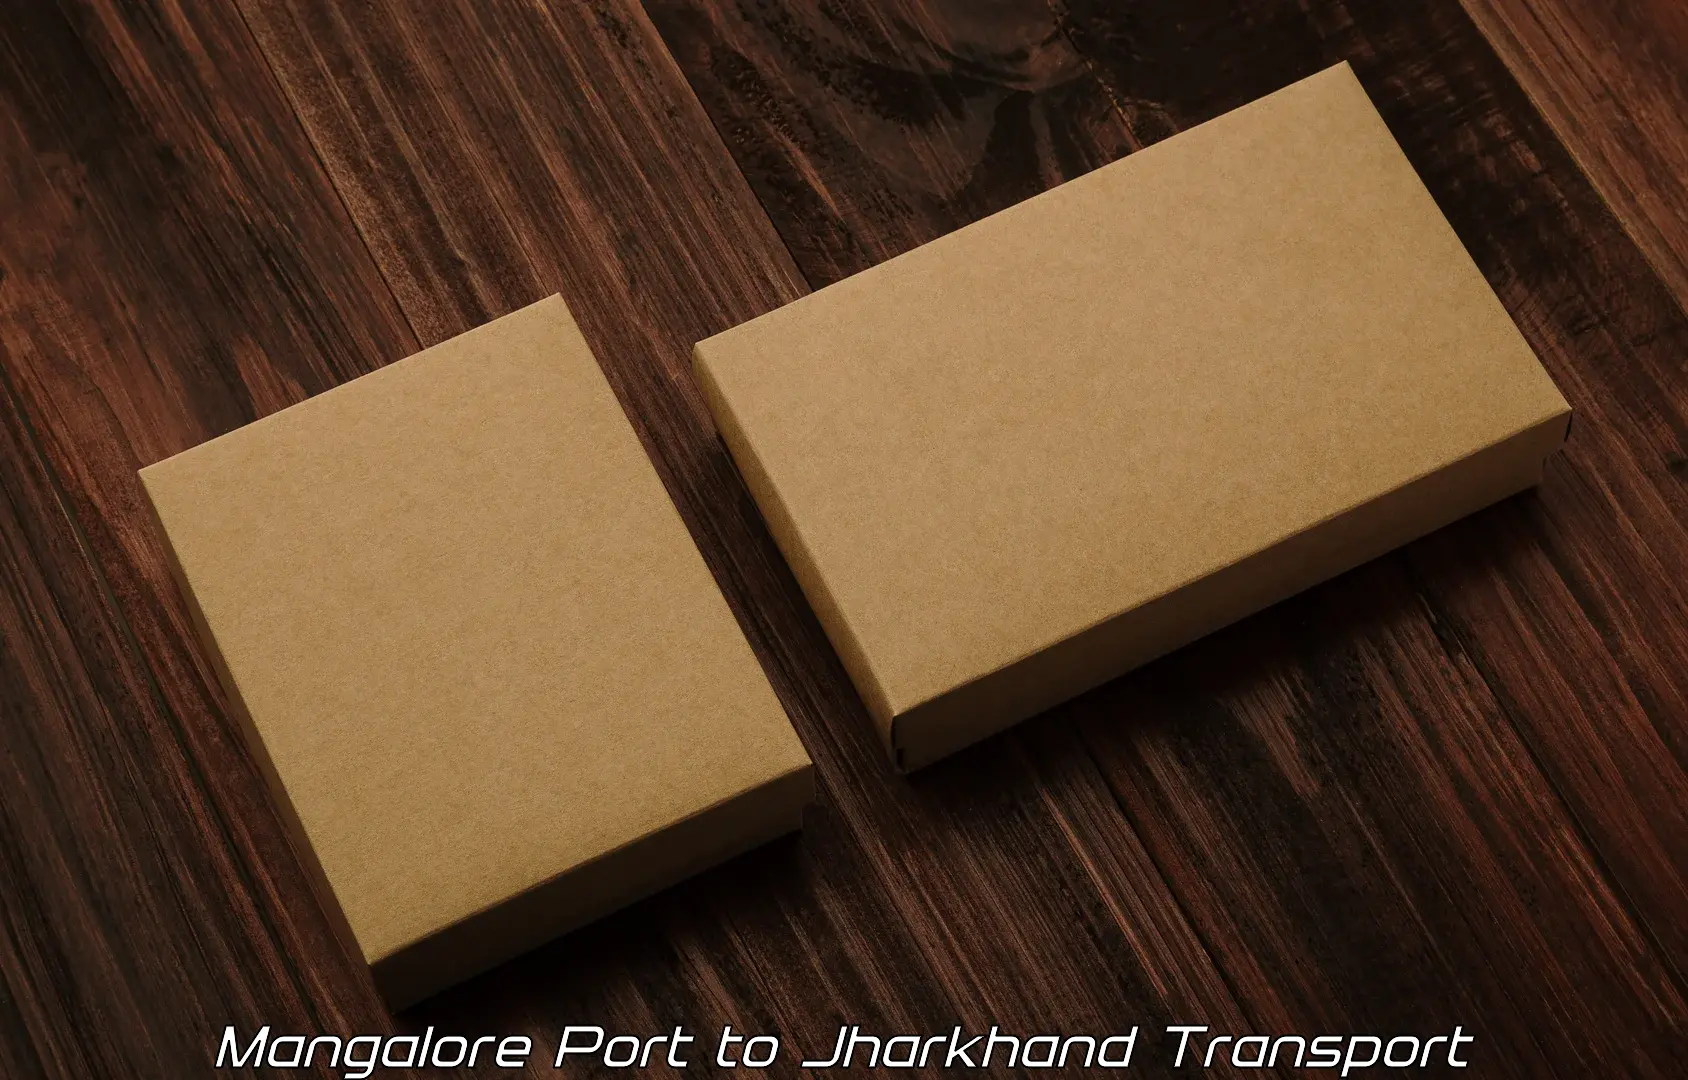 Land transport services in Mangalore Port to Deoghar